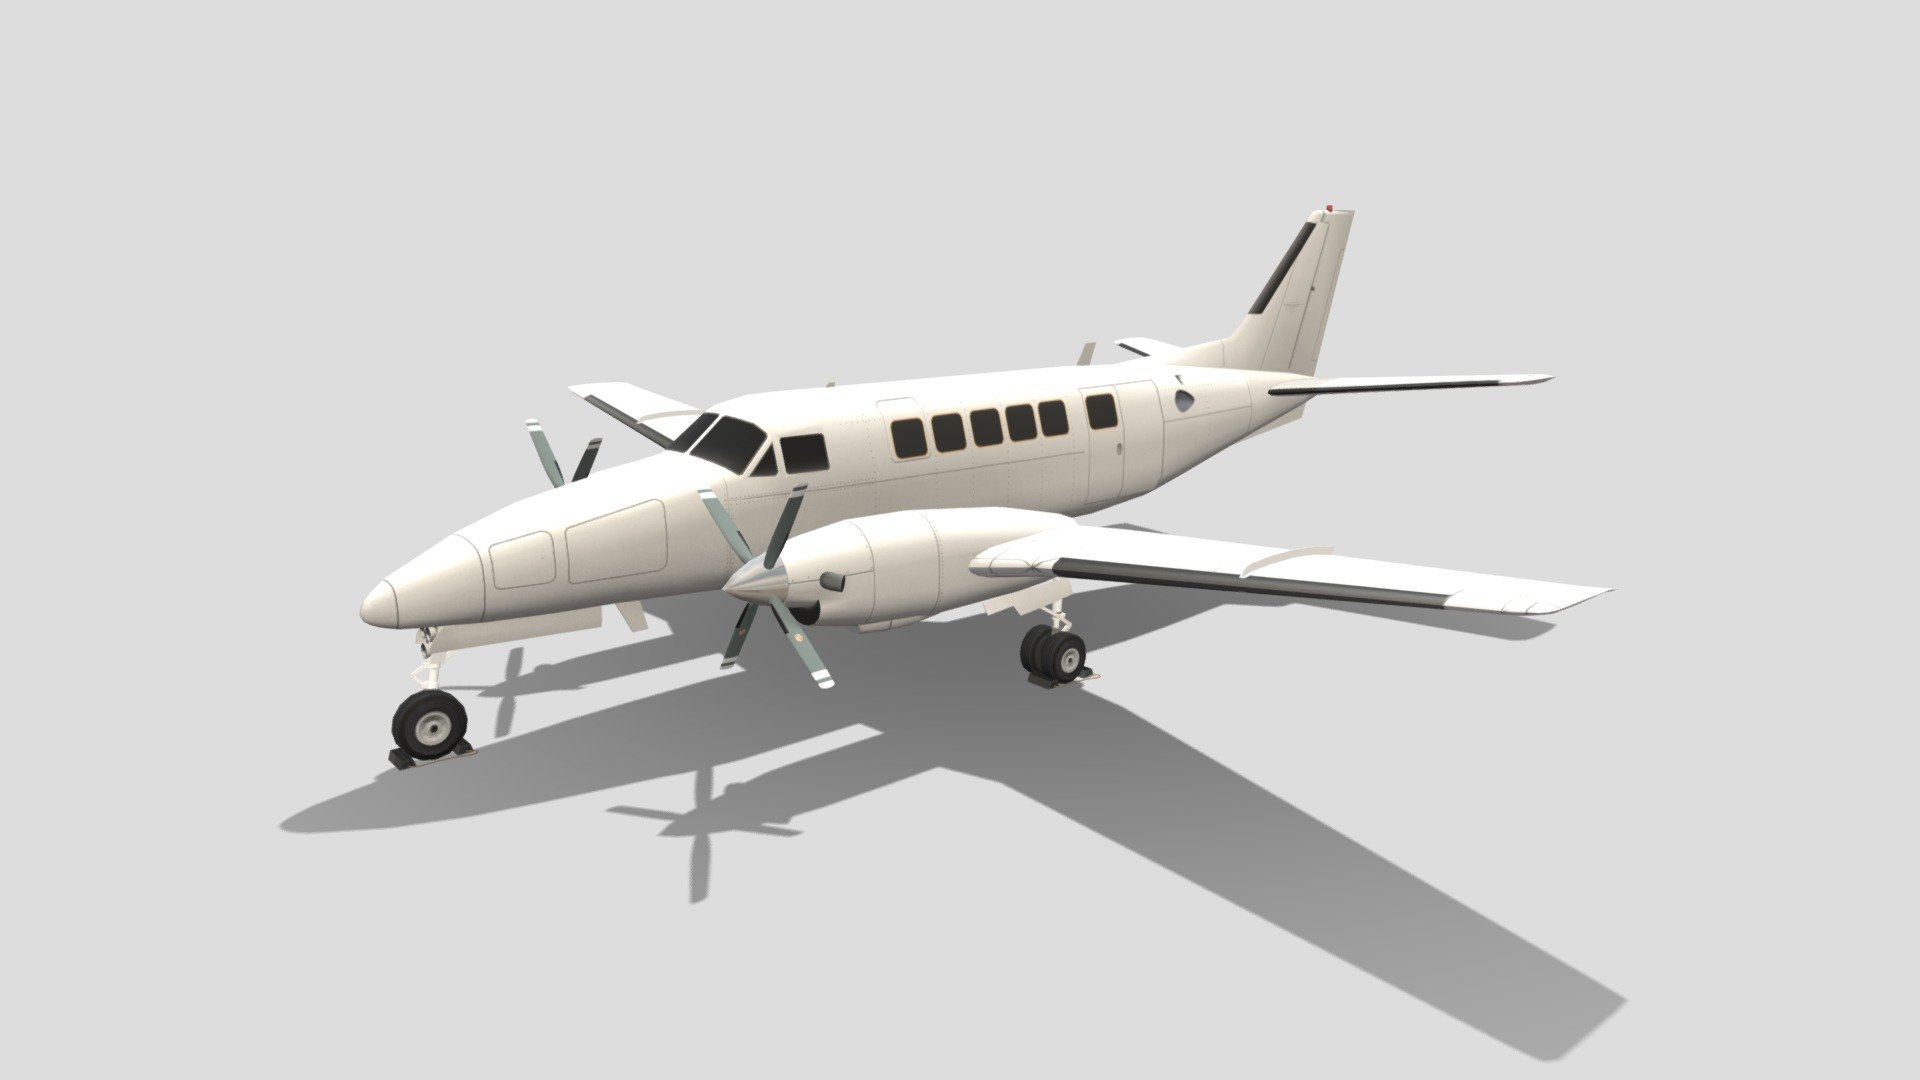 The Beechcraft Model 99 is a civilian aircraft produced by Beechcraft. It is also known as the Beech 99 Airliner and the Commuter 99. The 99 is a twin-engine, unpressurized, 15 to 17 passenger seat turboprop aircraft, derived from the earlier Beechcraft King Air and Queen Air. It uses the wings of the Queen Air, the engines and nacelles of the King Air, and sub-systems from both, with a specifically designed nose structure.

A considerable number of commuter and regional airlines in the U.S. and Canada previously operated the Beechcraft Model 99 in scheduled passenger service. The following list of air carriers is taken from Official Airline Guide (OAG) flight schedules from 1974 to 1995

this is a static, non rigged, non animated, Lowpoly mesh, blank layered 2048 psd template layered texture, for MSFS or XPlane Scenery Airport development , standard materials, enough detailed just to be seen as part of enviroment on airfields or airports - Beechcraft beech 99 airliner - 3D model by hangarcerouno 3d model